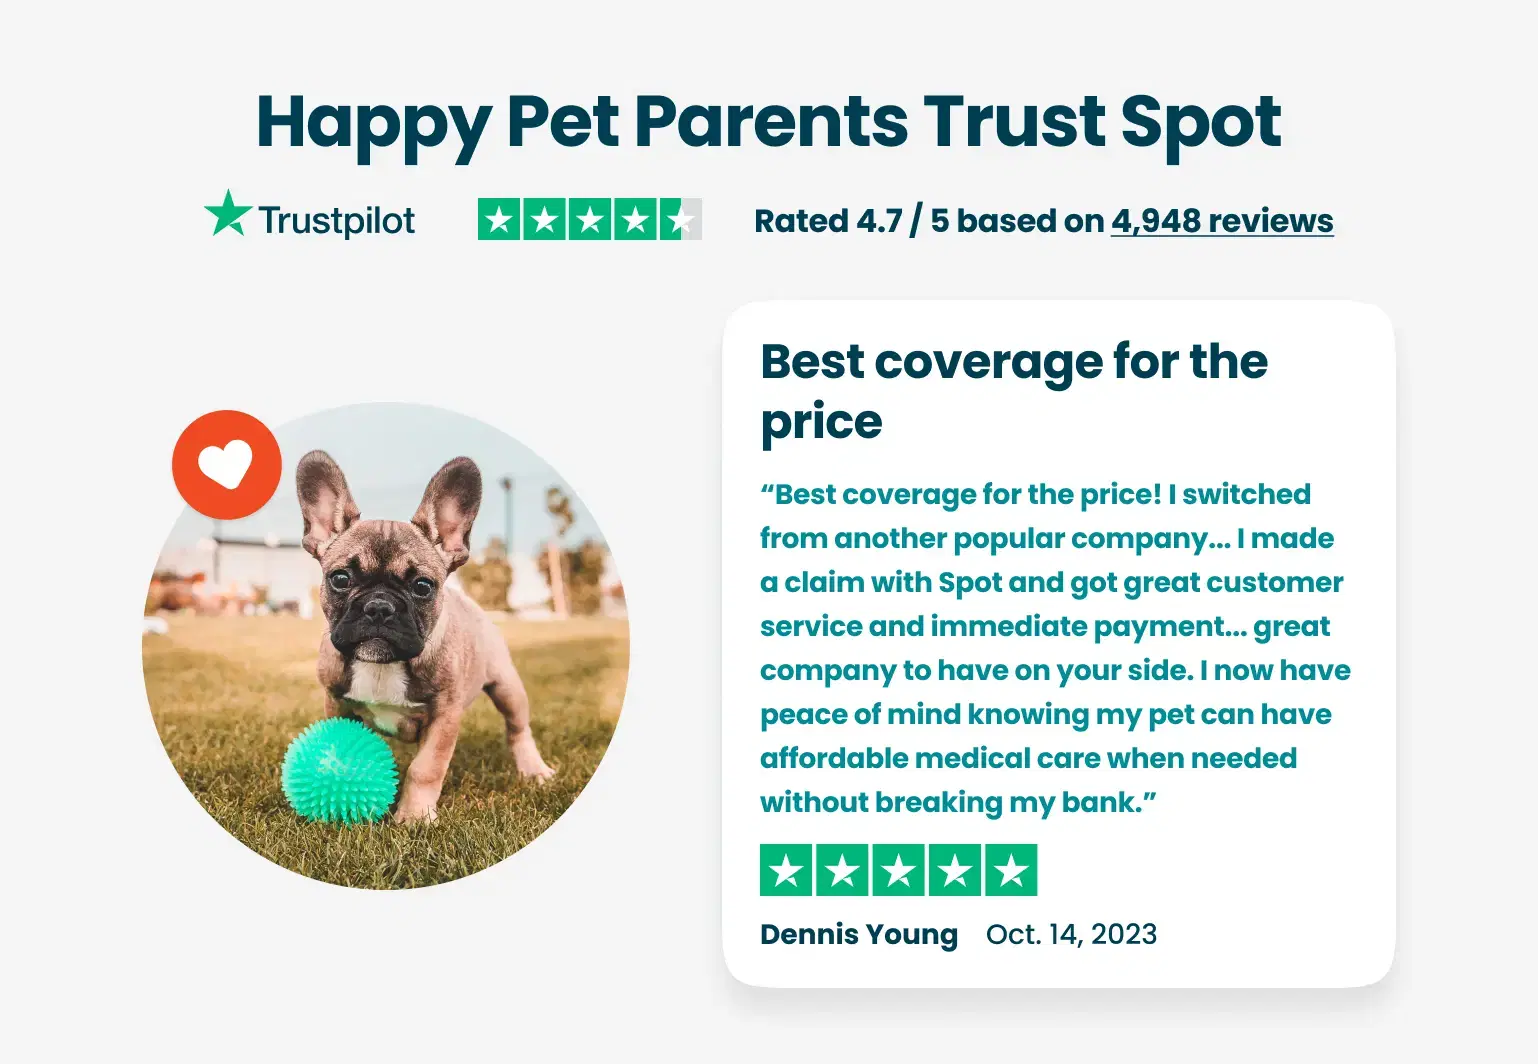 A French Bulldog stands on grass with a green ball beneath text reading "Best coverage for the price" and a 4.7/5 Trustpilot rating with 4,948 reviews.